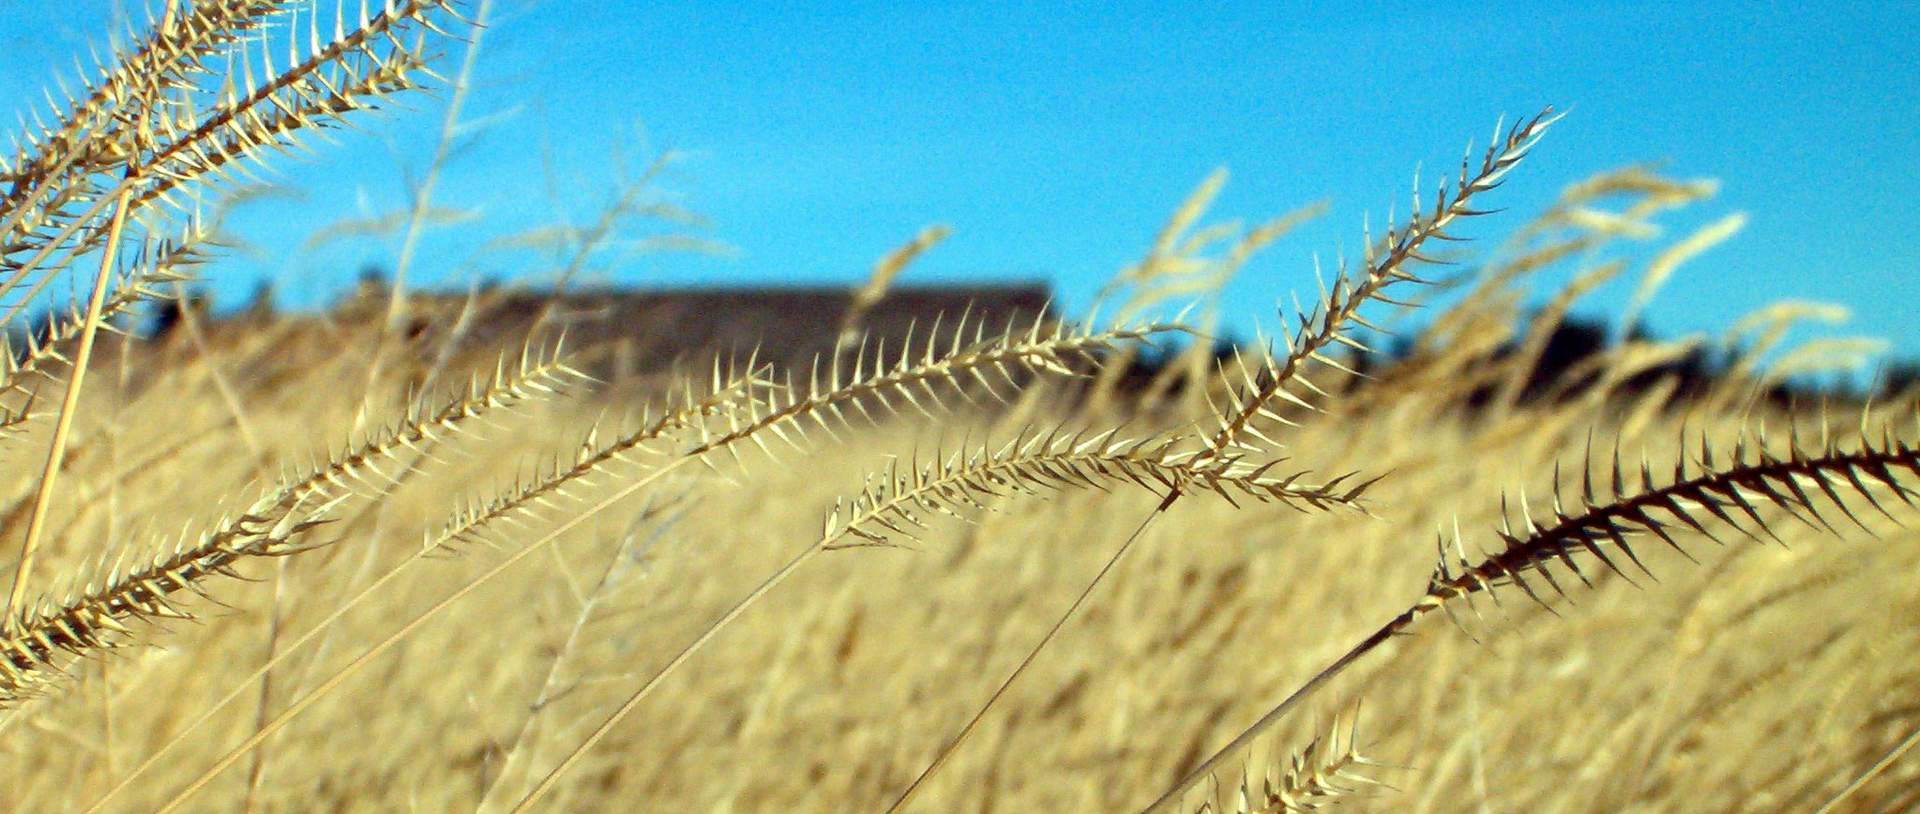 A close up of wheat stalks in the sun